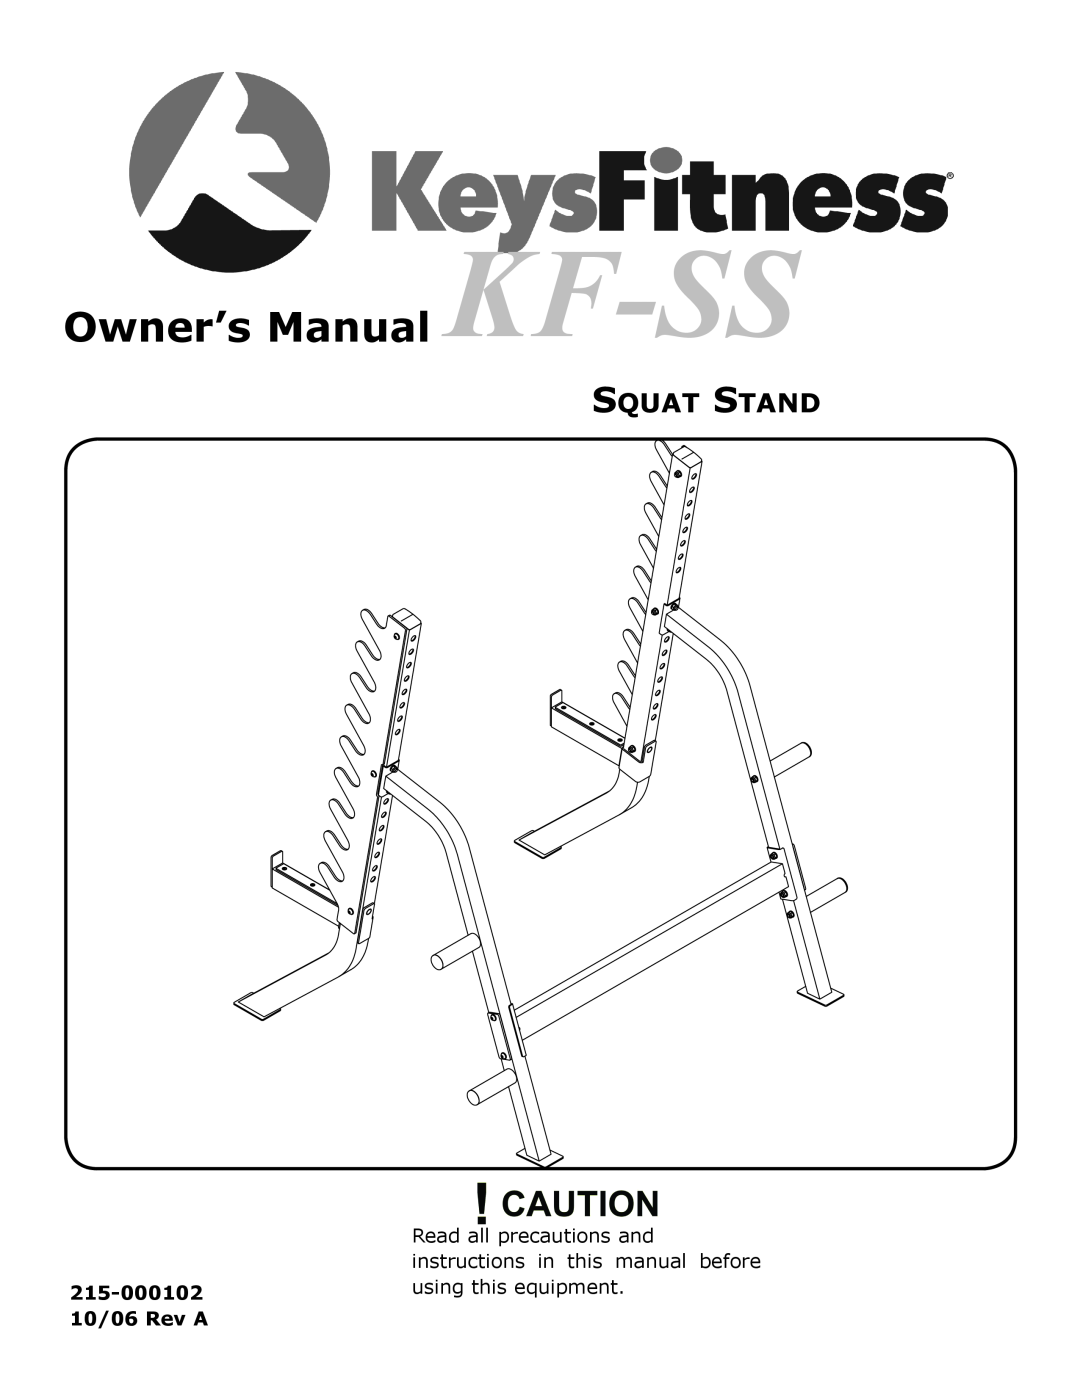 Keys Fitness owner manual Owner’s Manual KF-SS, Squat Stand, 10/06 Rev A 